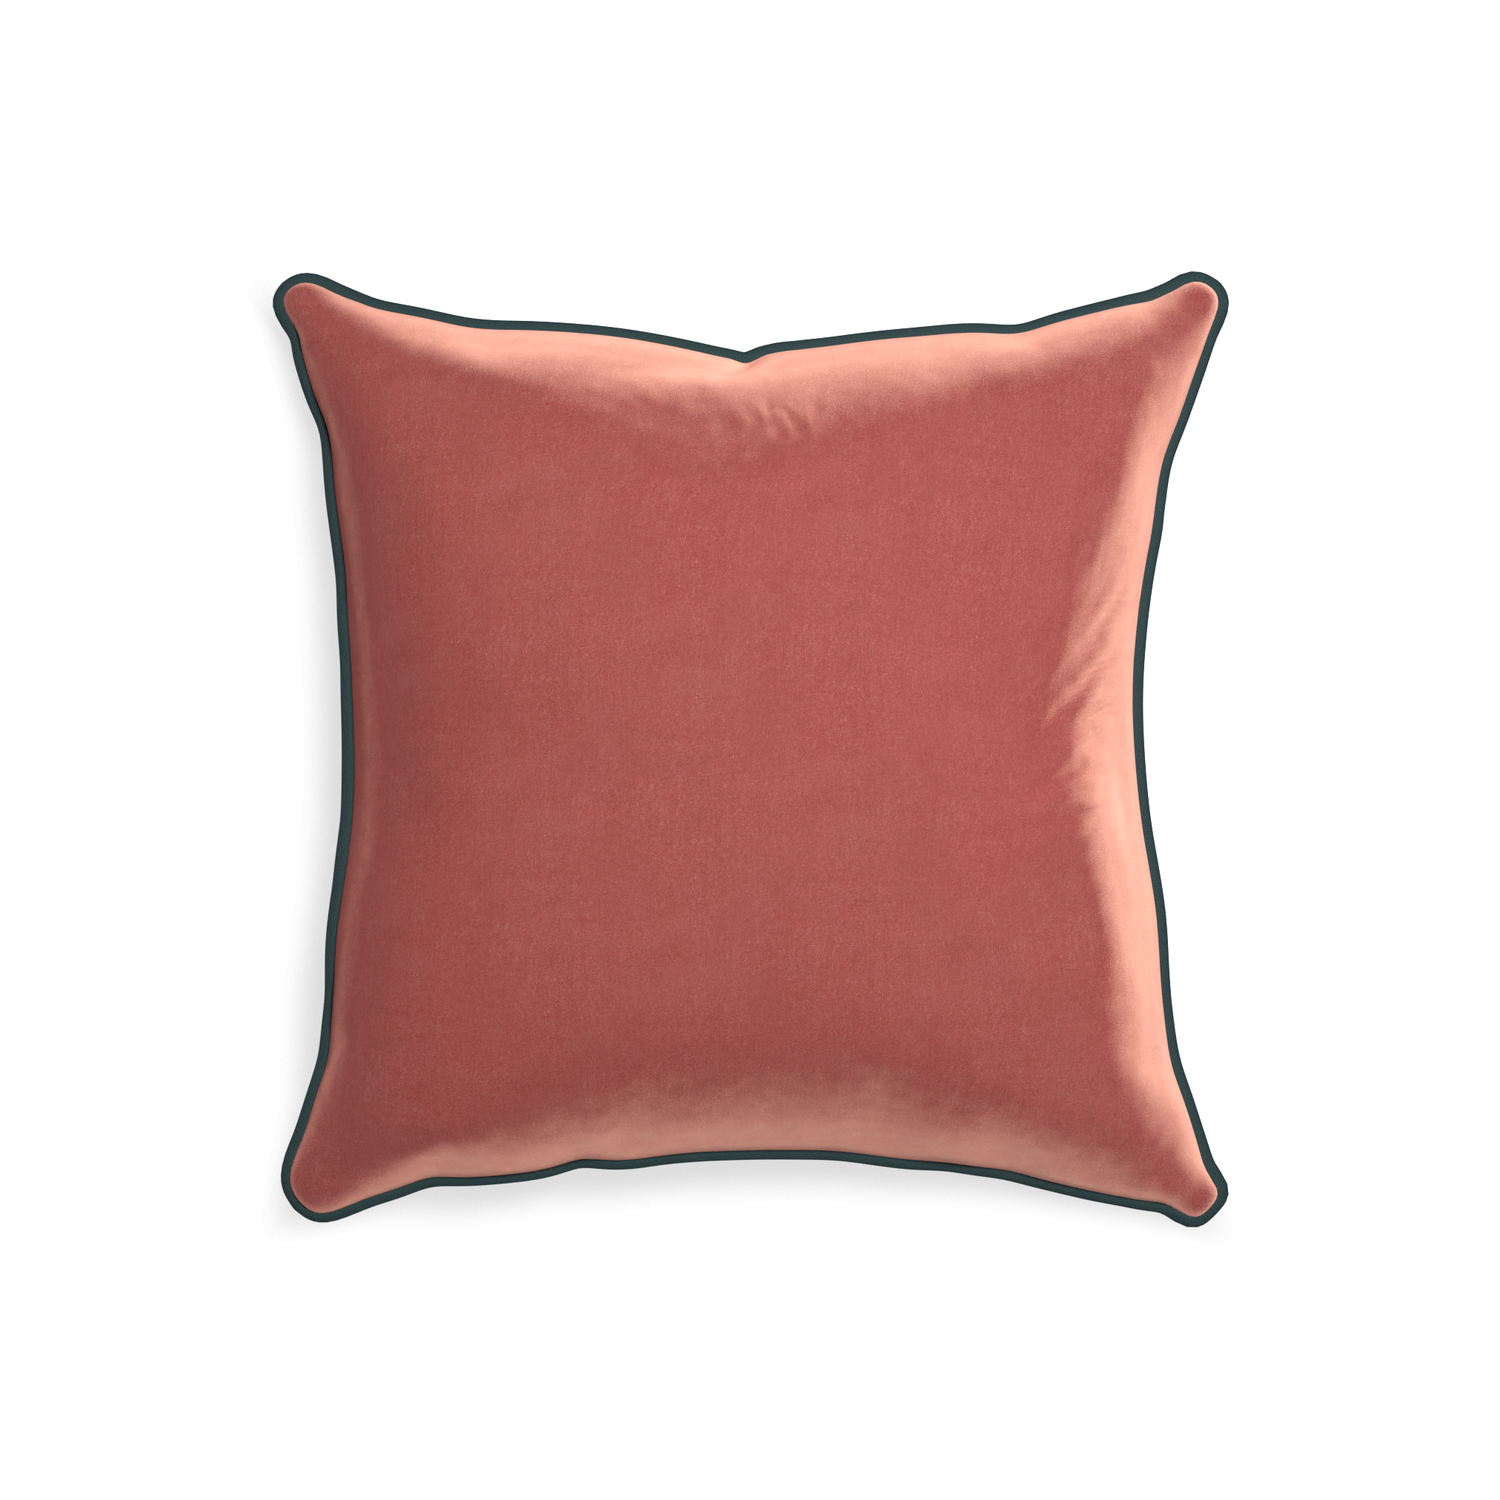 20-square cosmo velvet custom coralpillow with p piping on white background